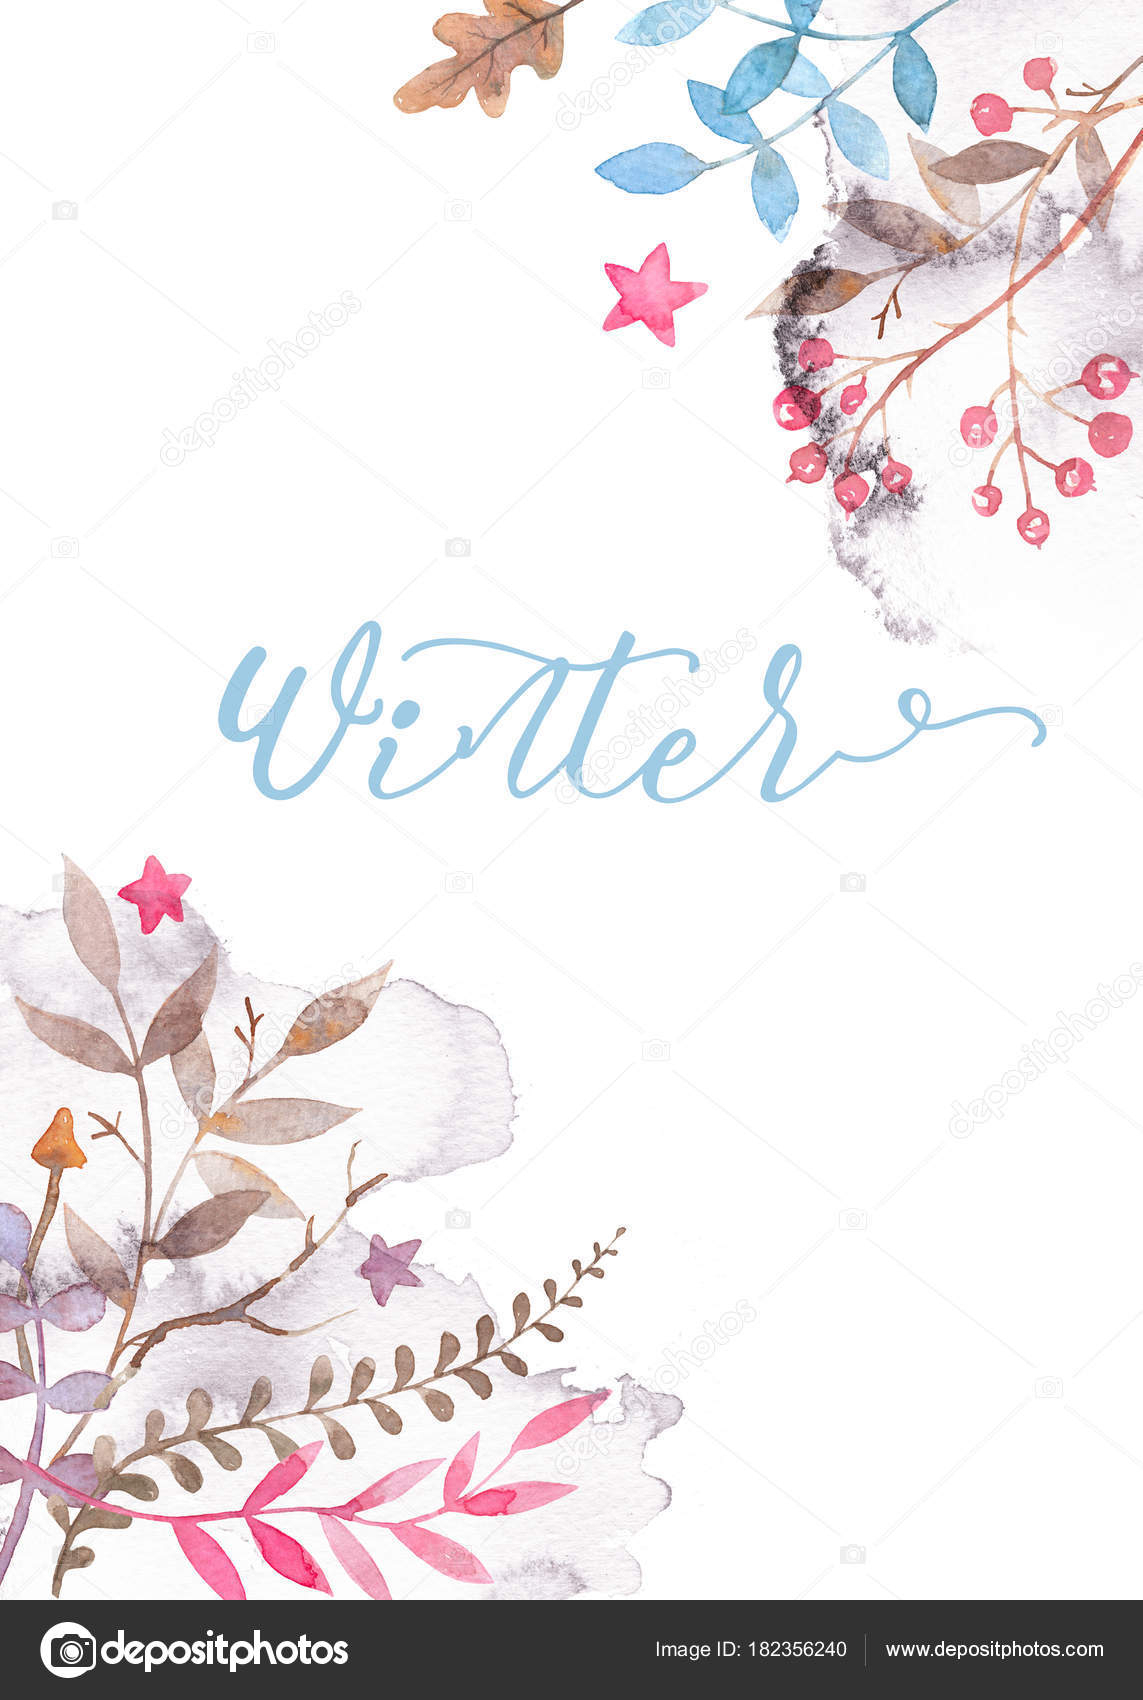 Hand Drawn Watercolor Greeting Card Template With Floral Within Greeting Card Layout Templates